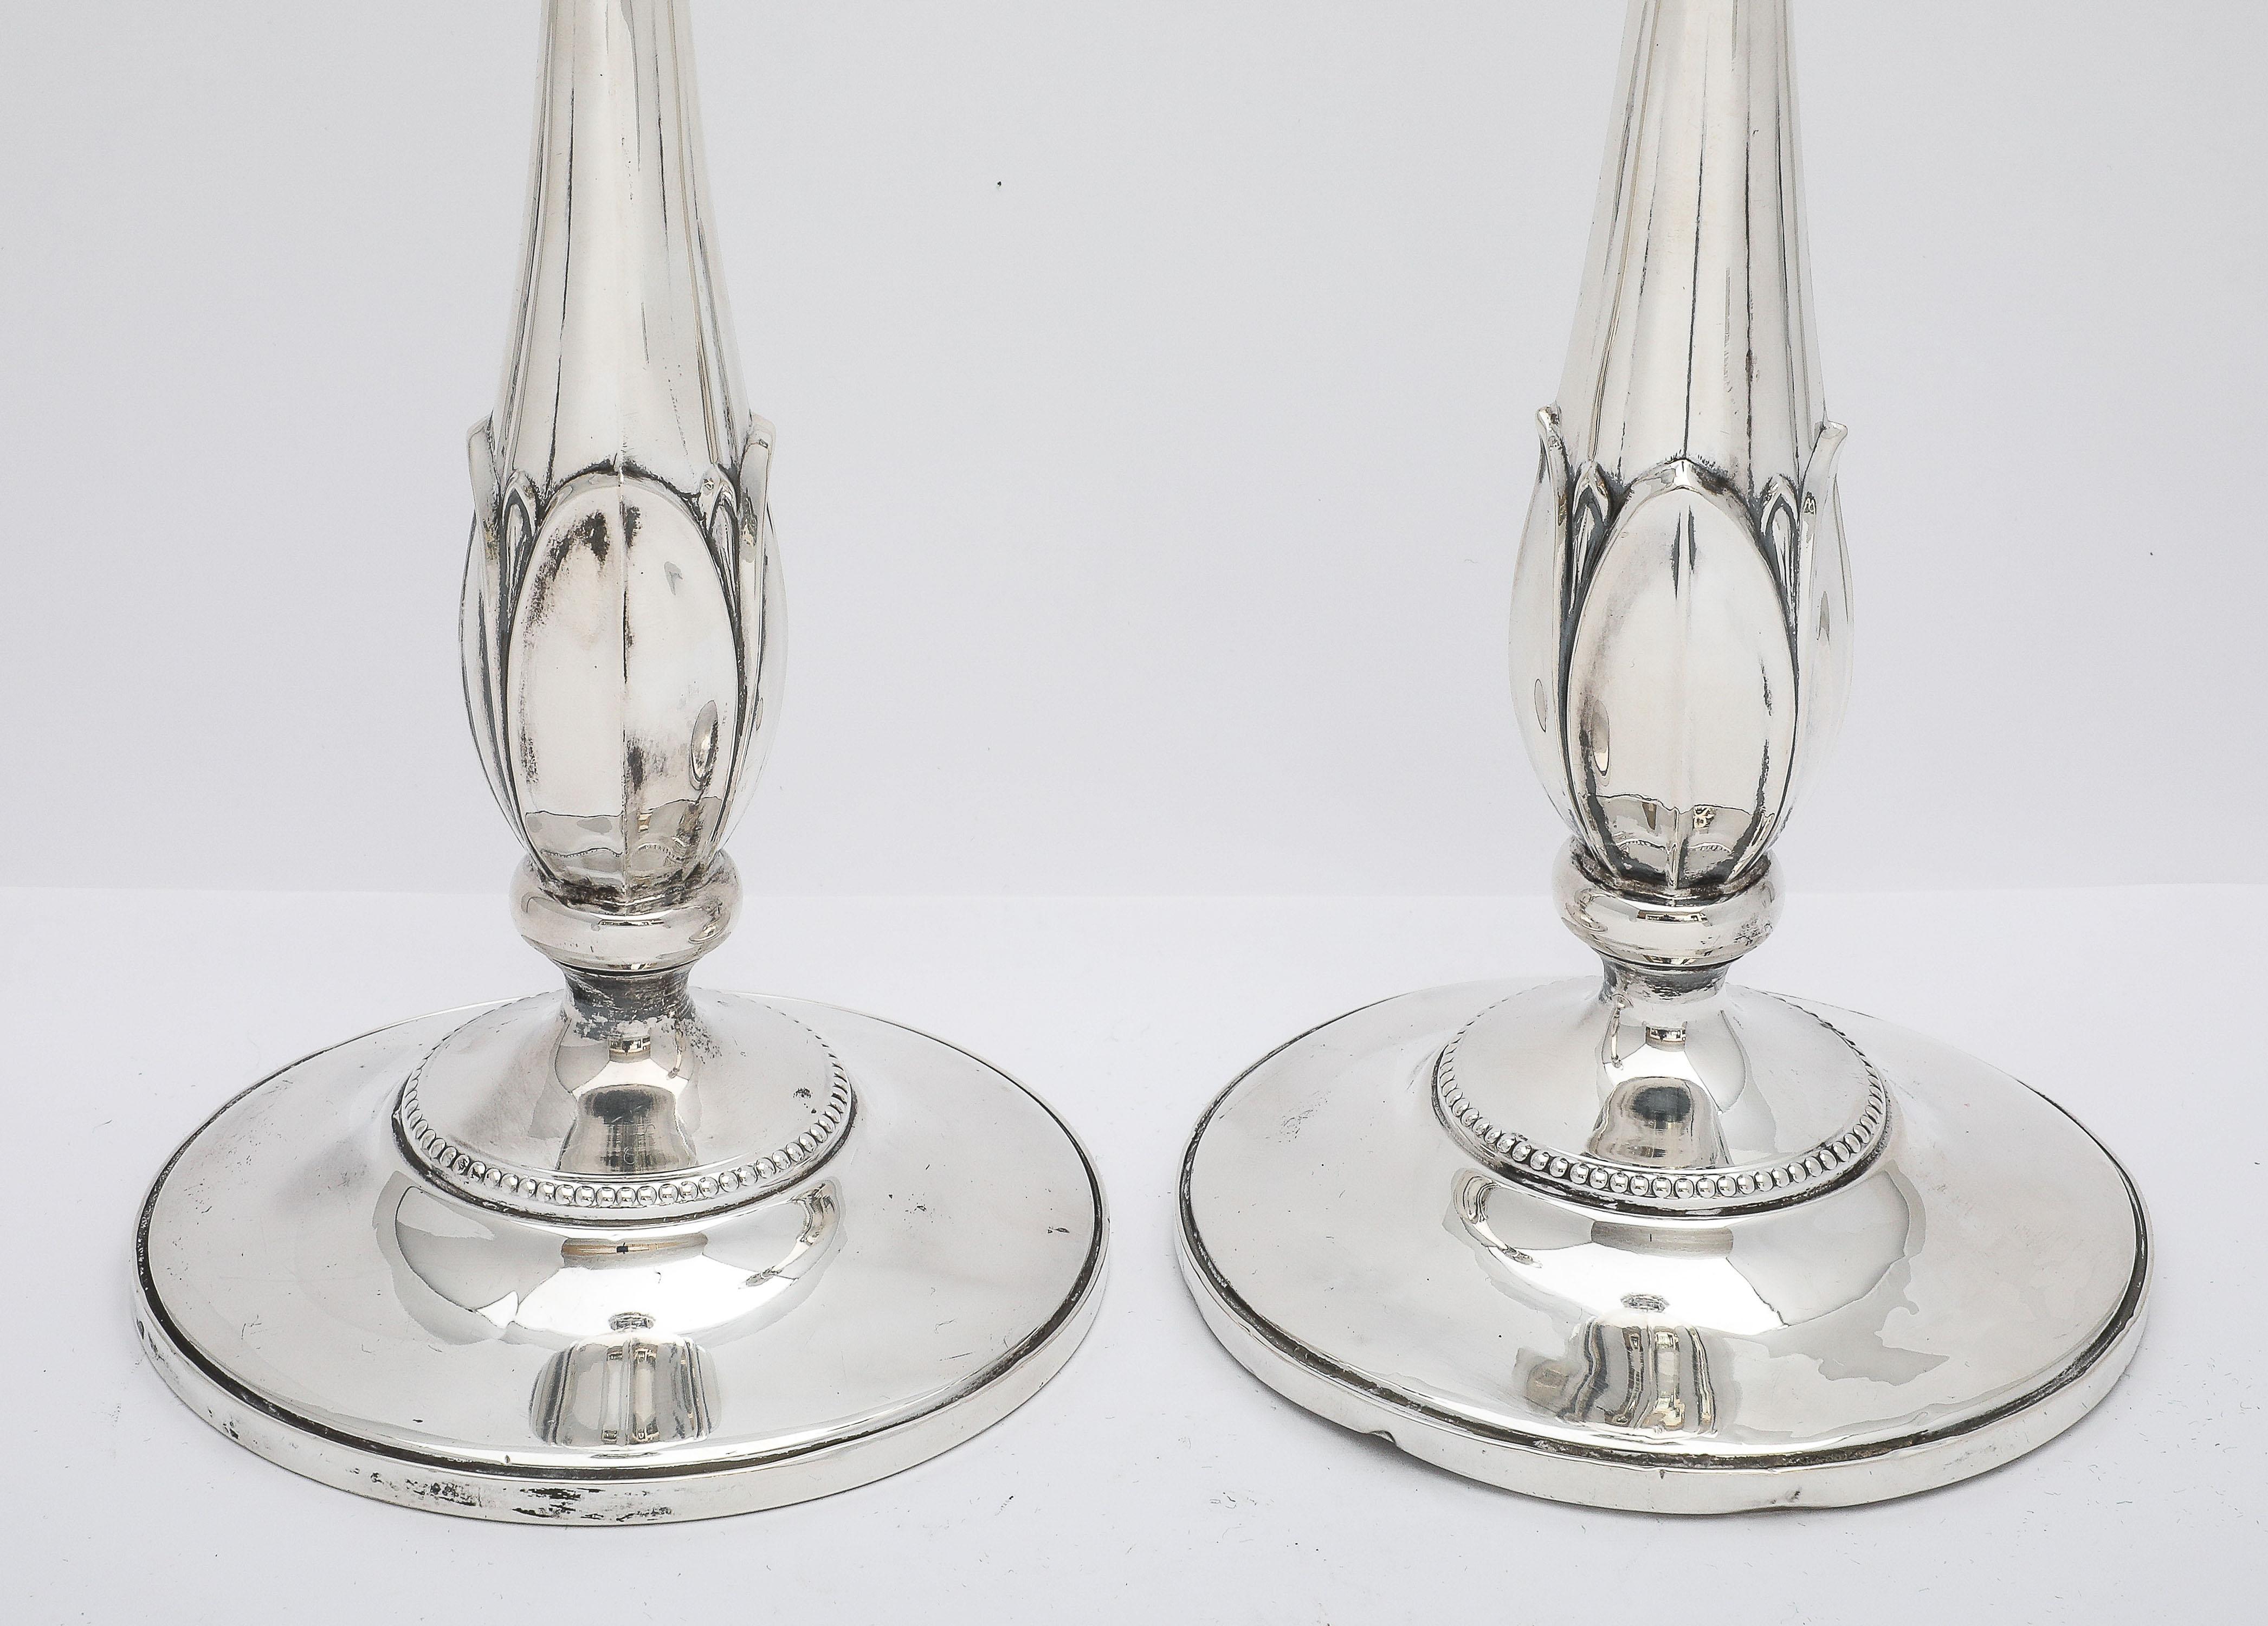 Rare Pair of Tall Sterling Silver Art Nouveau-Style Flower-Form Candlesticks In Good Condition For Sale In New York, NY